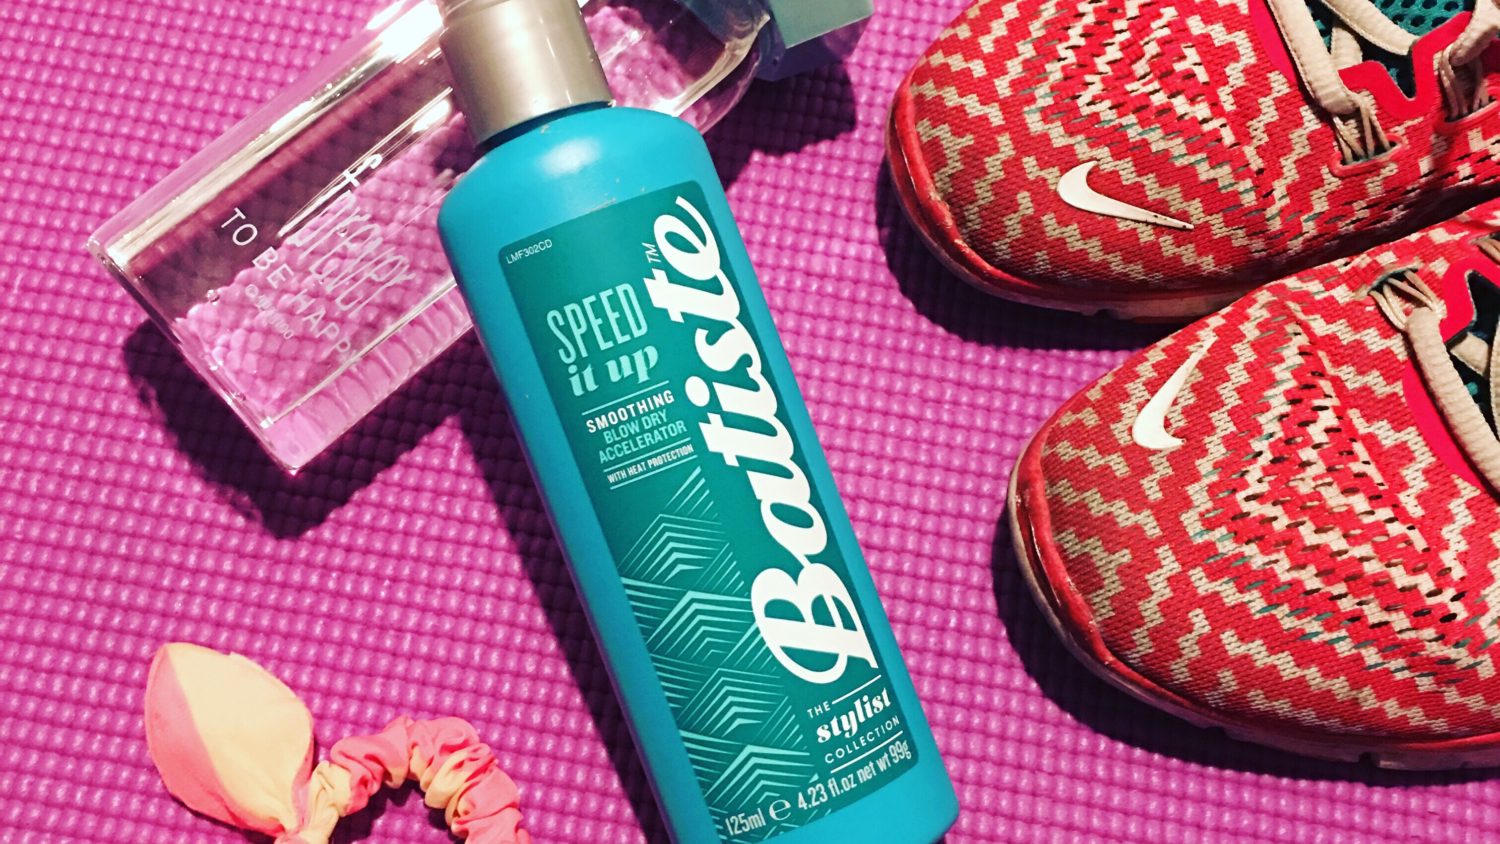 Batiste Blow Dry Accelerator – Reclaim Your Time!